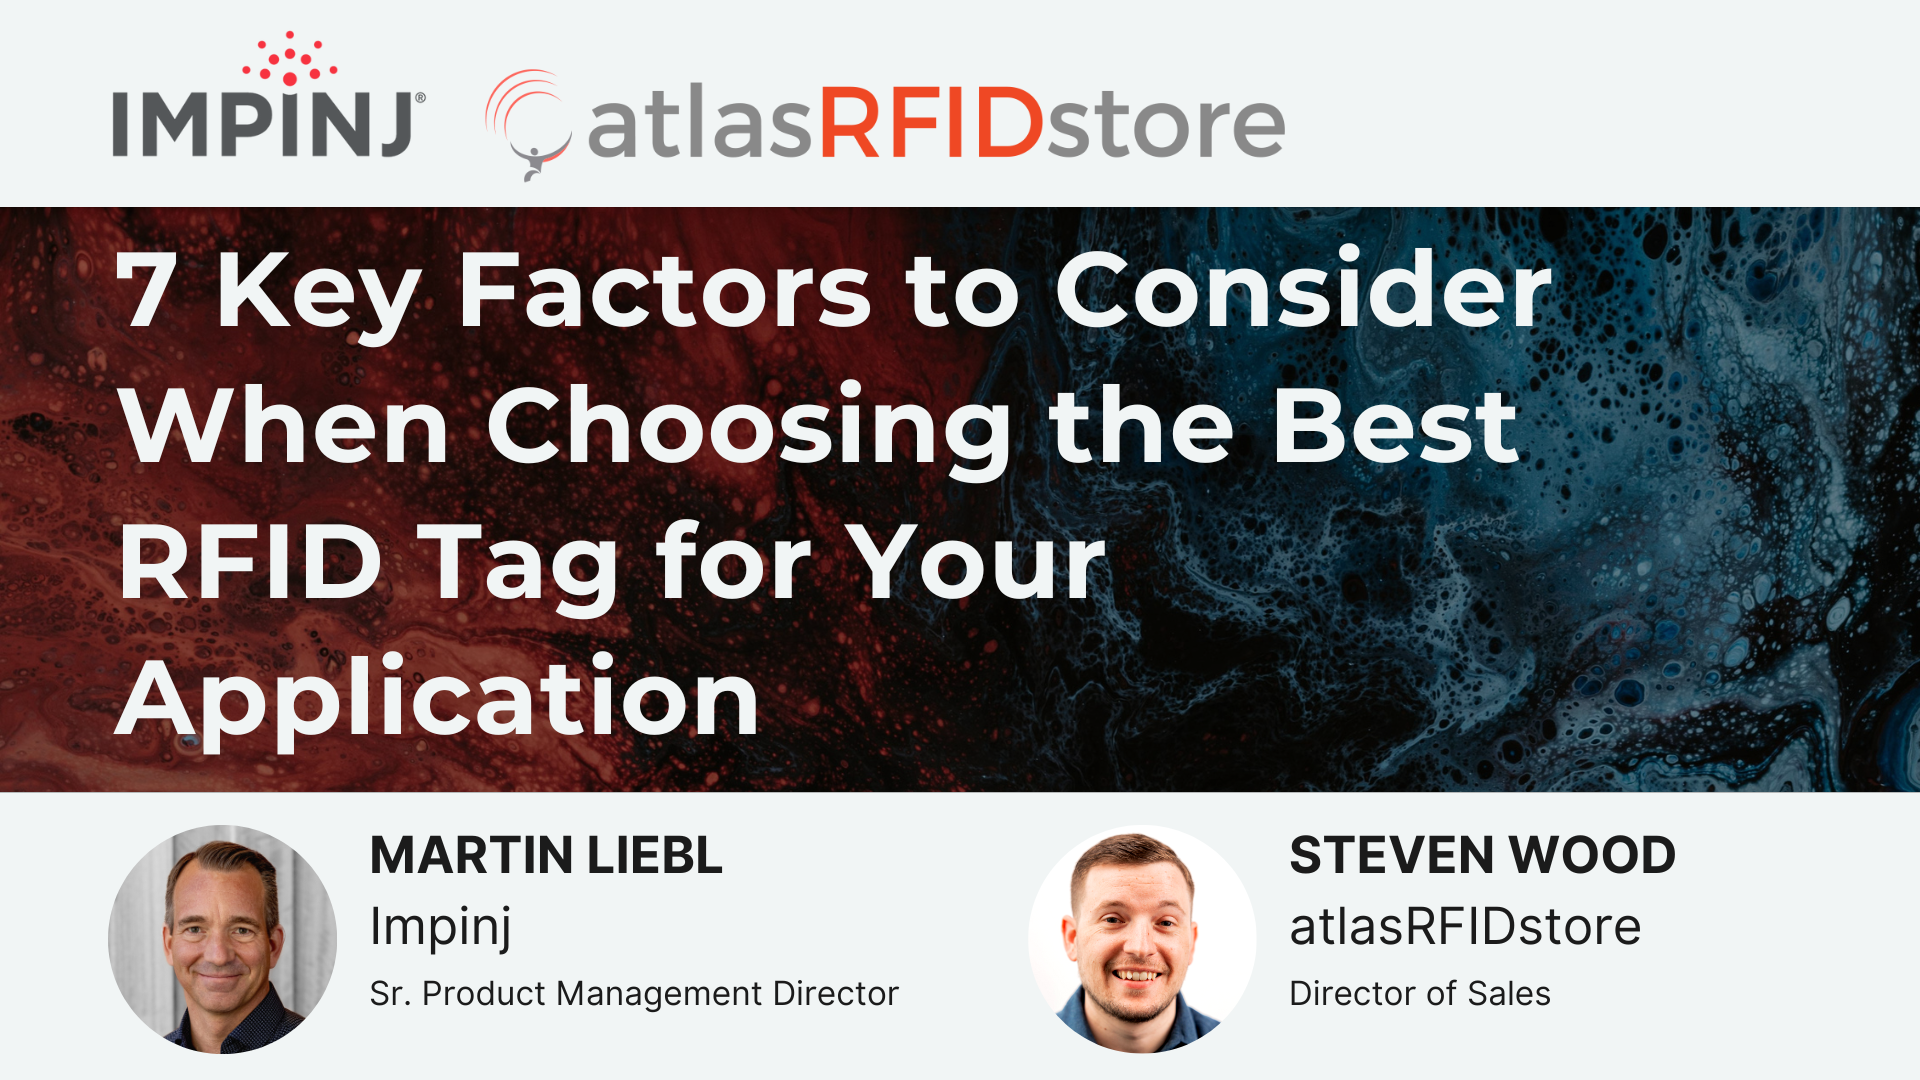 https://cdn11.bigcommerce.com/s-ka7ofex/product_images/uploaded_images/7-key-factors-to-consider-when-choosing-the-best-rfid-tag-for-your-application.png